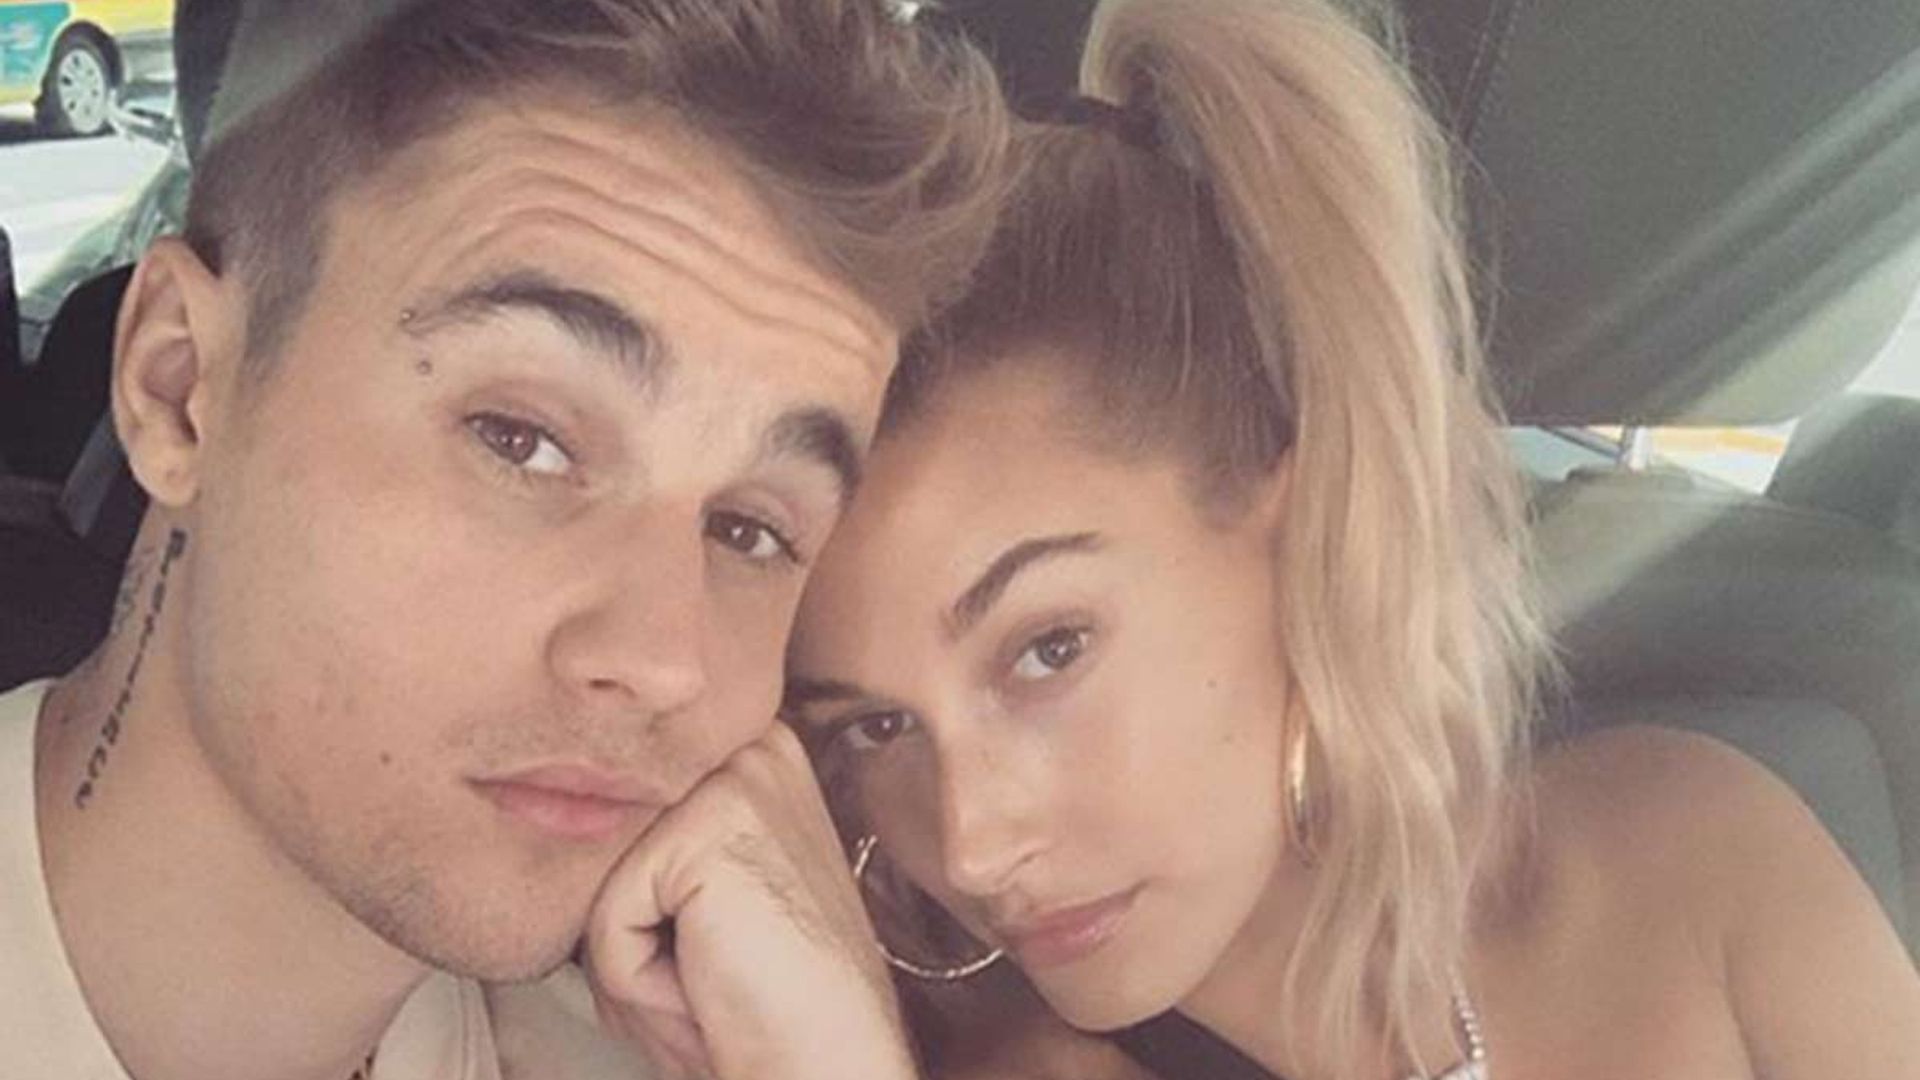 Everything you need to know about Justin Bieber and Hailey Baldwin's wedding